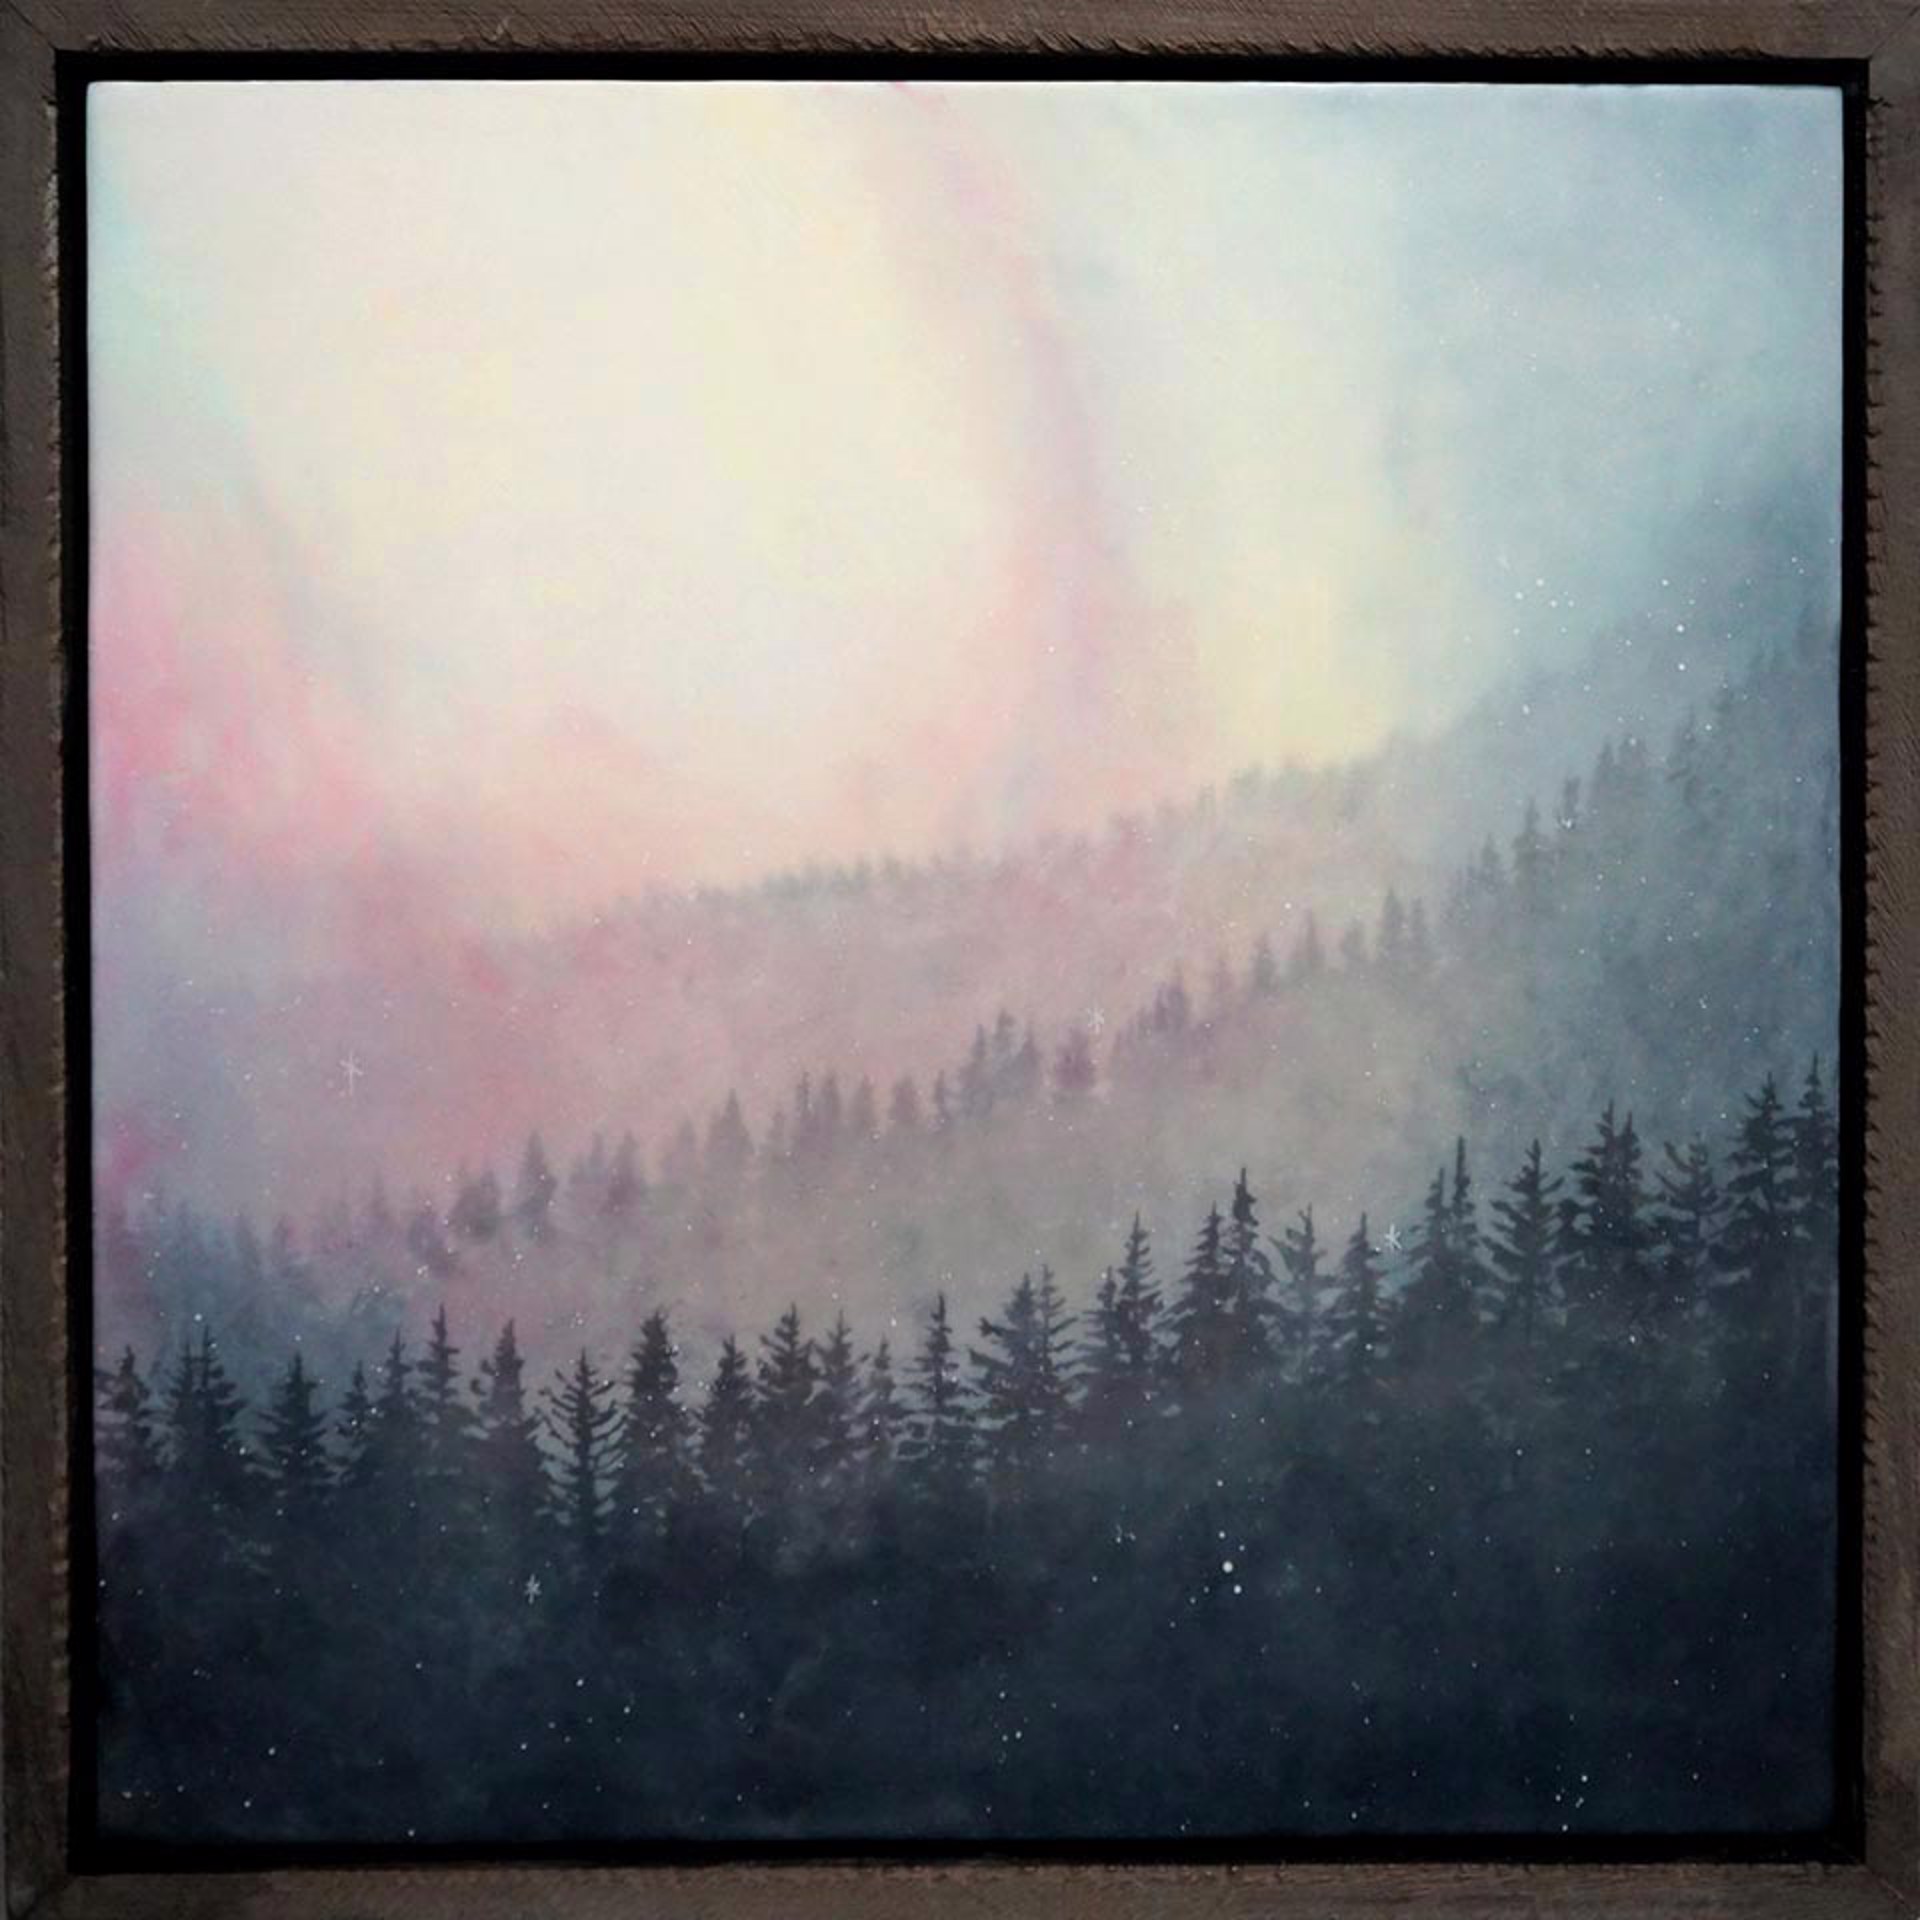 Original Encaustic Painting By Bridgette Meinhold Mountain Landscape With Pine Trees And A Pink Hue